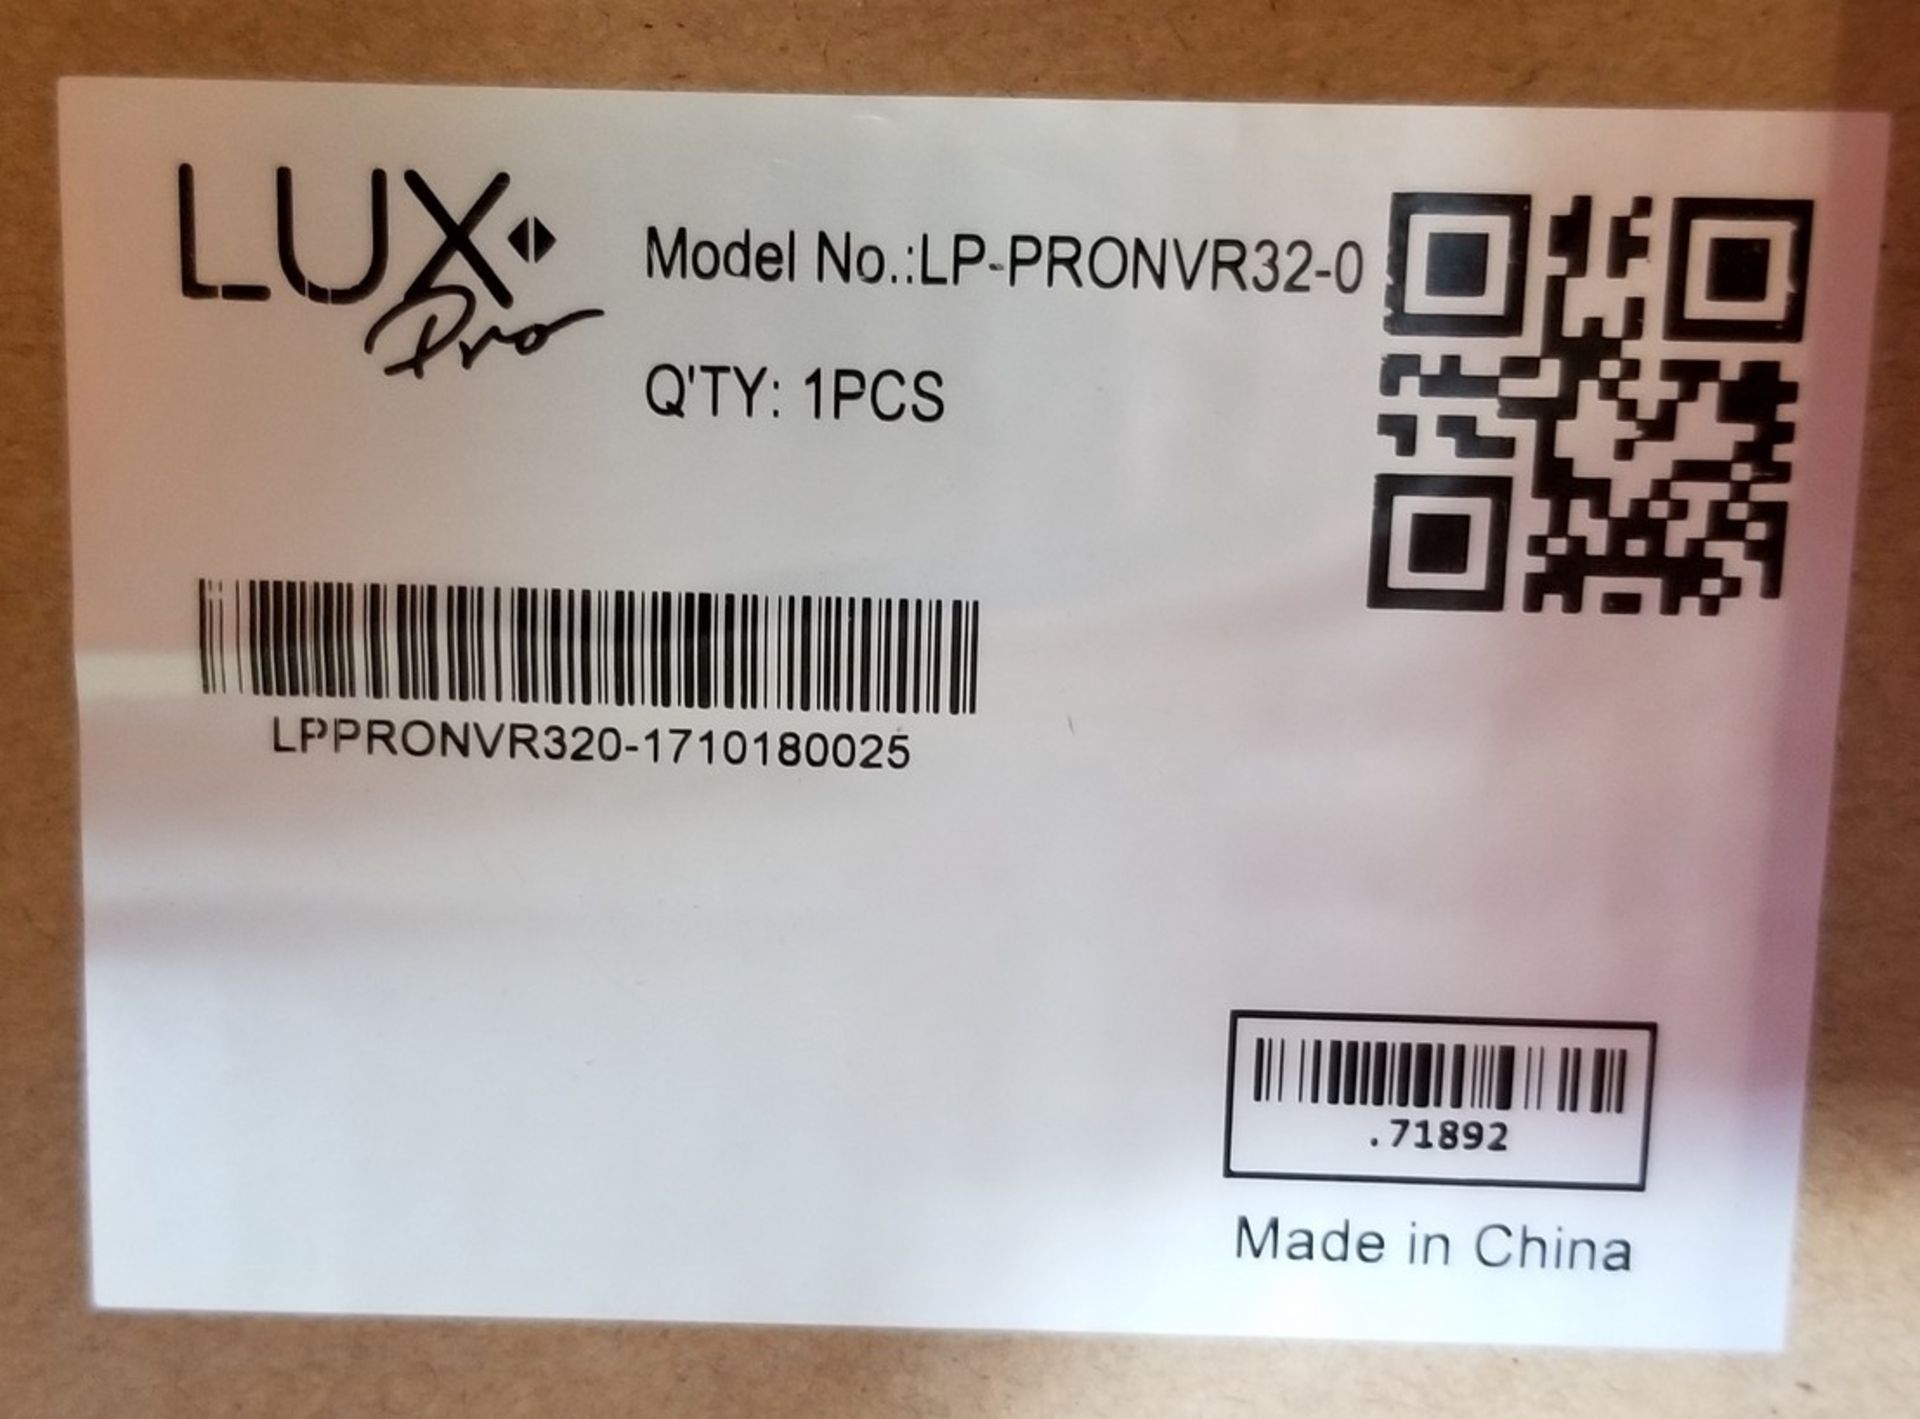 LUX, LP-PRONVR32-0 NETWORK VIDEO RECORDER - (NOB) COST $528 - Image 2 of 4